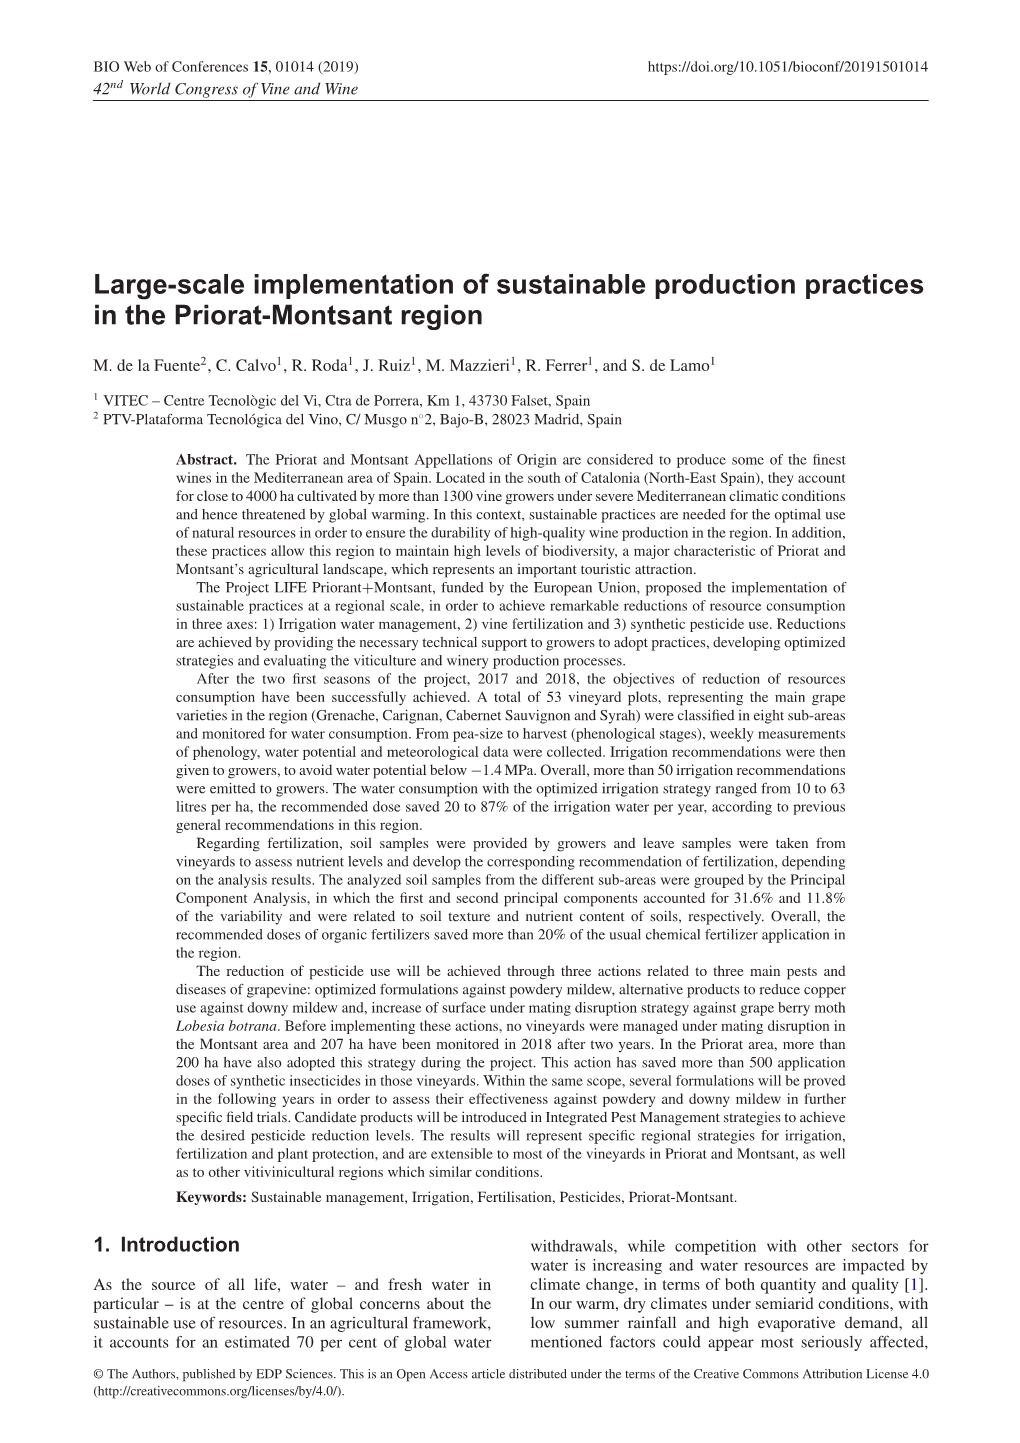 Large-Scale Implementation of Sustainable Production Practices in the Priorat-Montsant Region